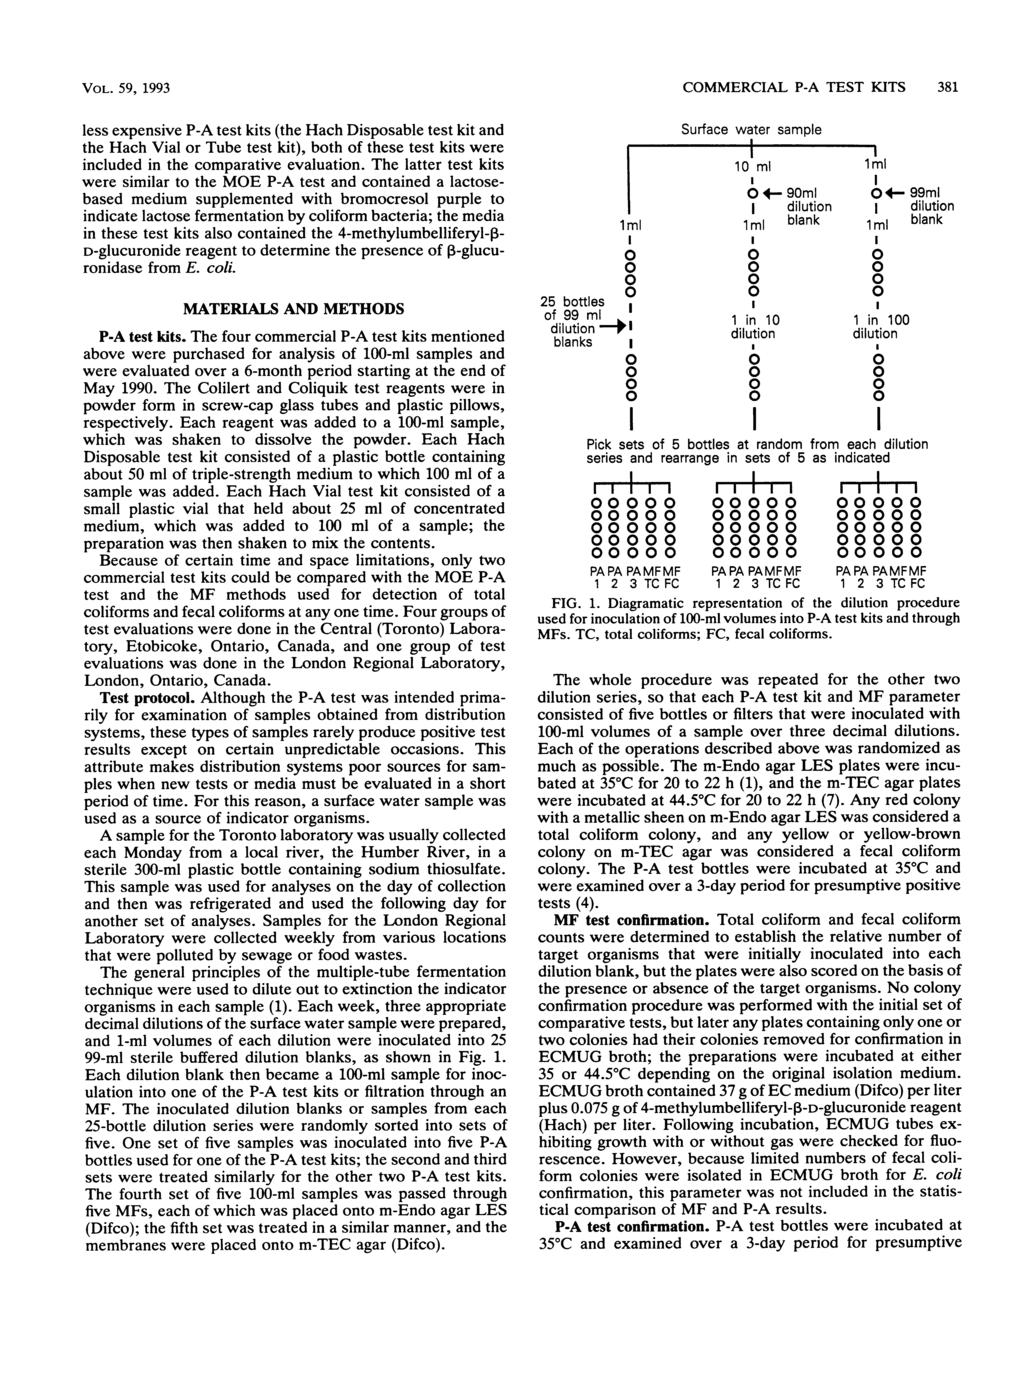 VOL. 59, 1993 less expensive test kits (the Hach Disposable test kit and the Hach Vial or Tube test kit), both of these test kits were included in the comparative evaluation.